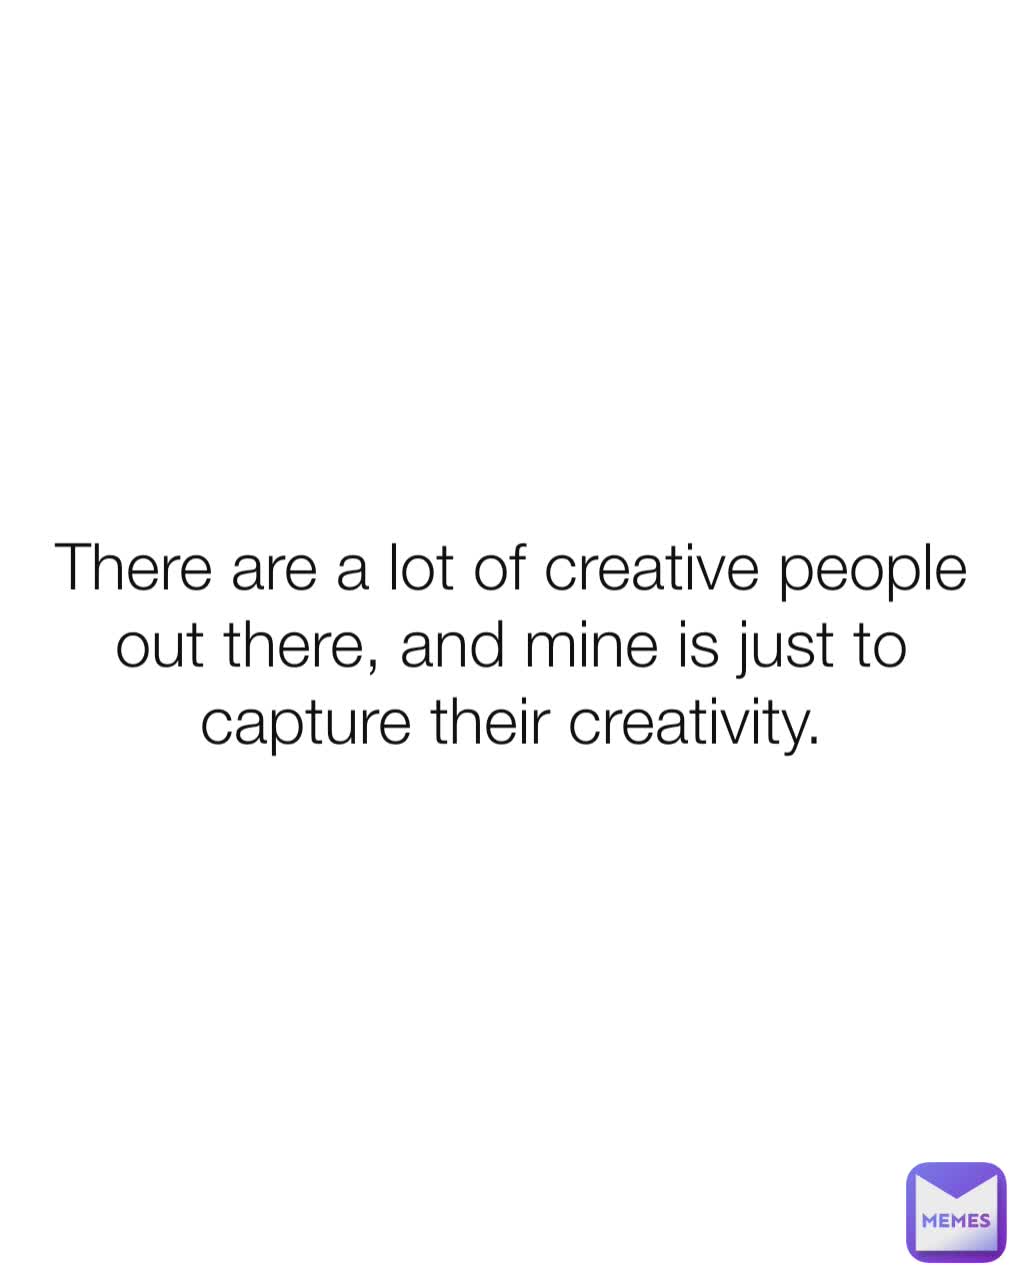 There are a lot of creative people out there, and mine is just to capture their creativity.